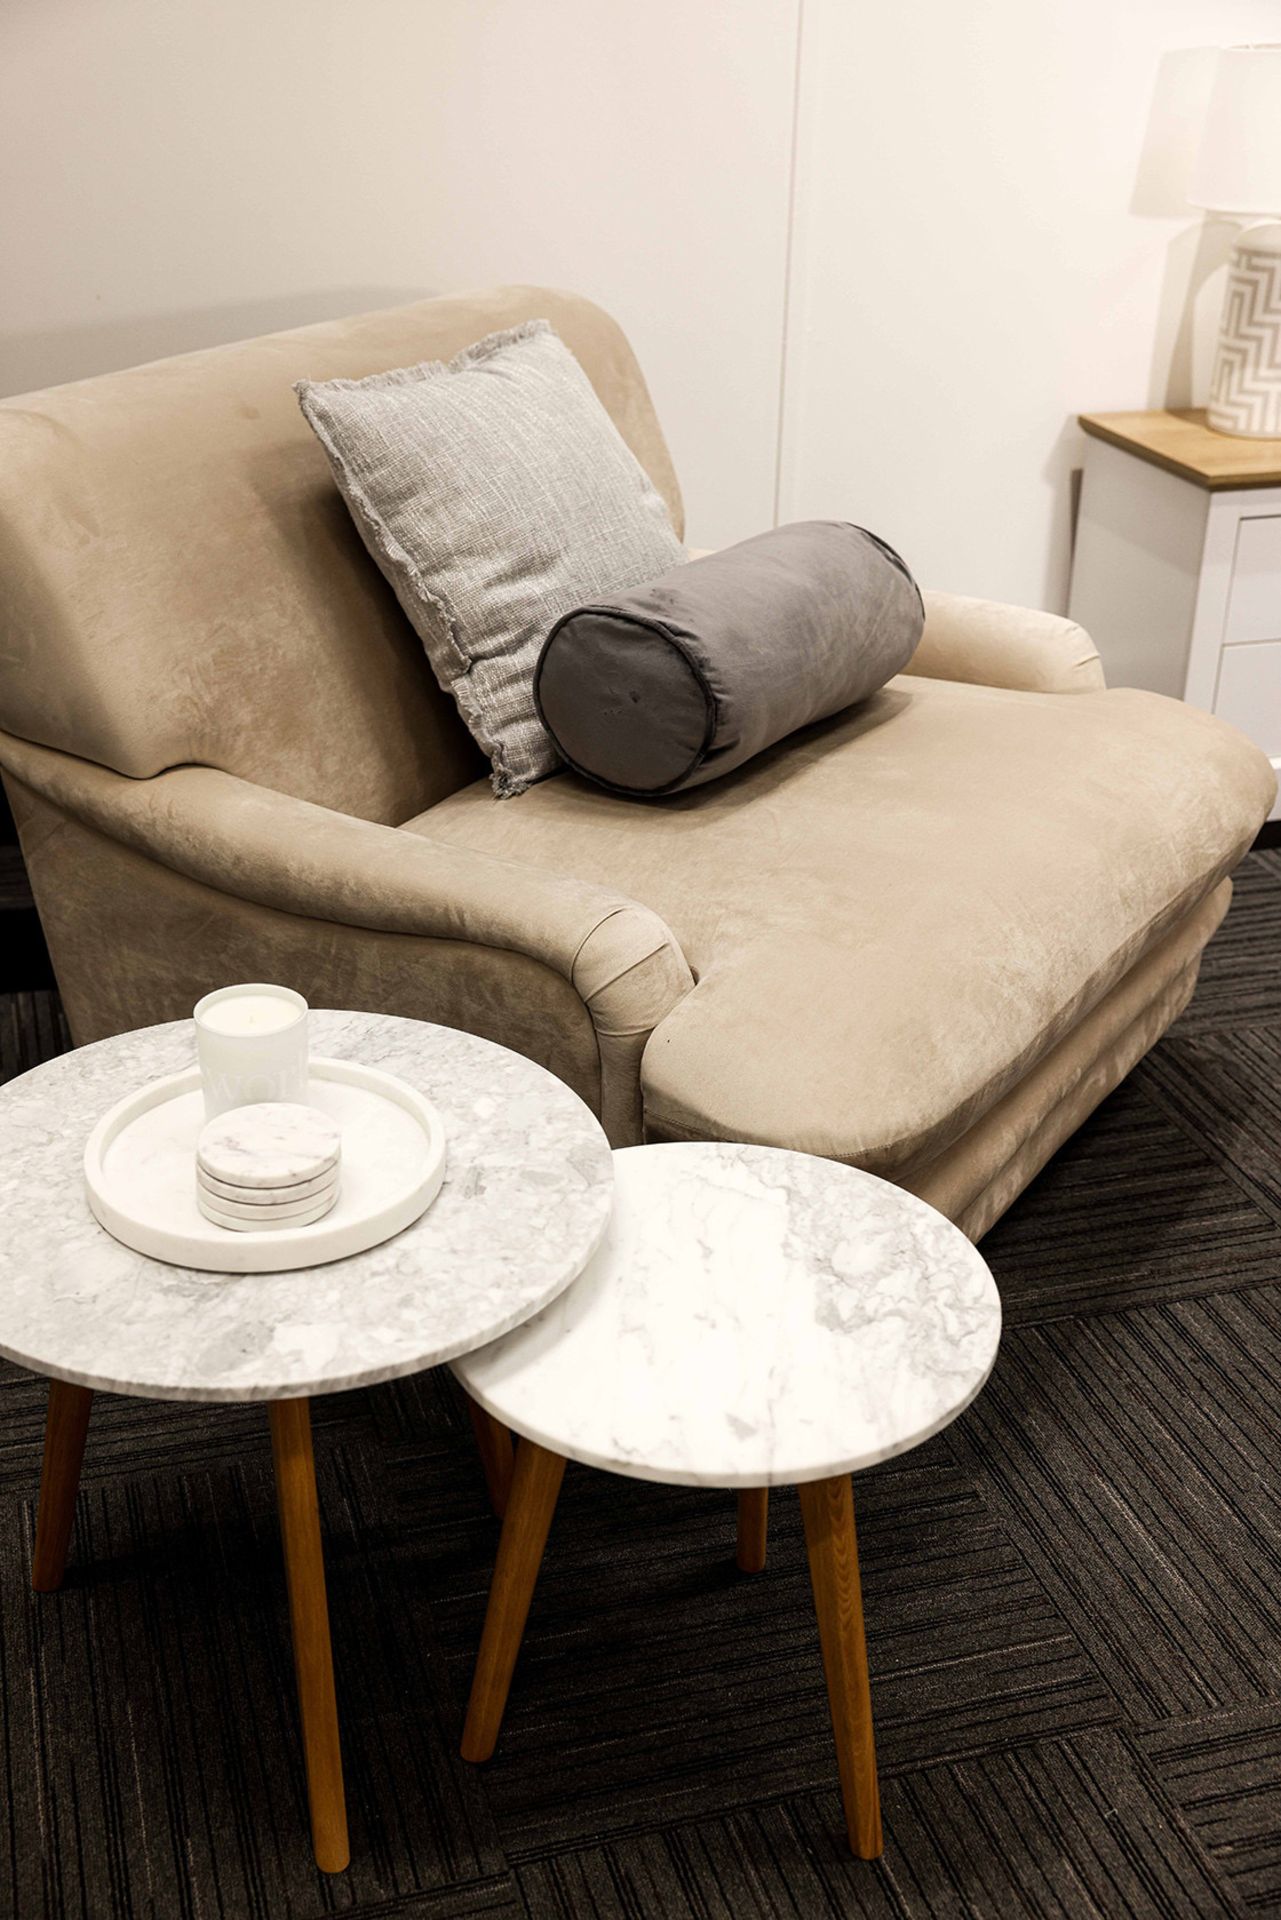 HARLOW ROUND NEST OF TWO TABLES IN MARBLE/WHITE WITH OAK LEGS - RRP £289 - Image 4 of 5